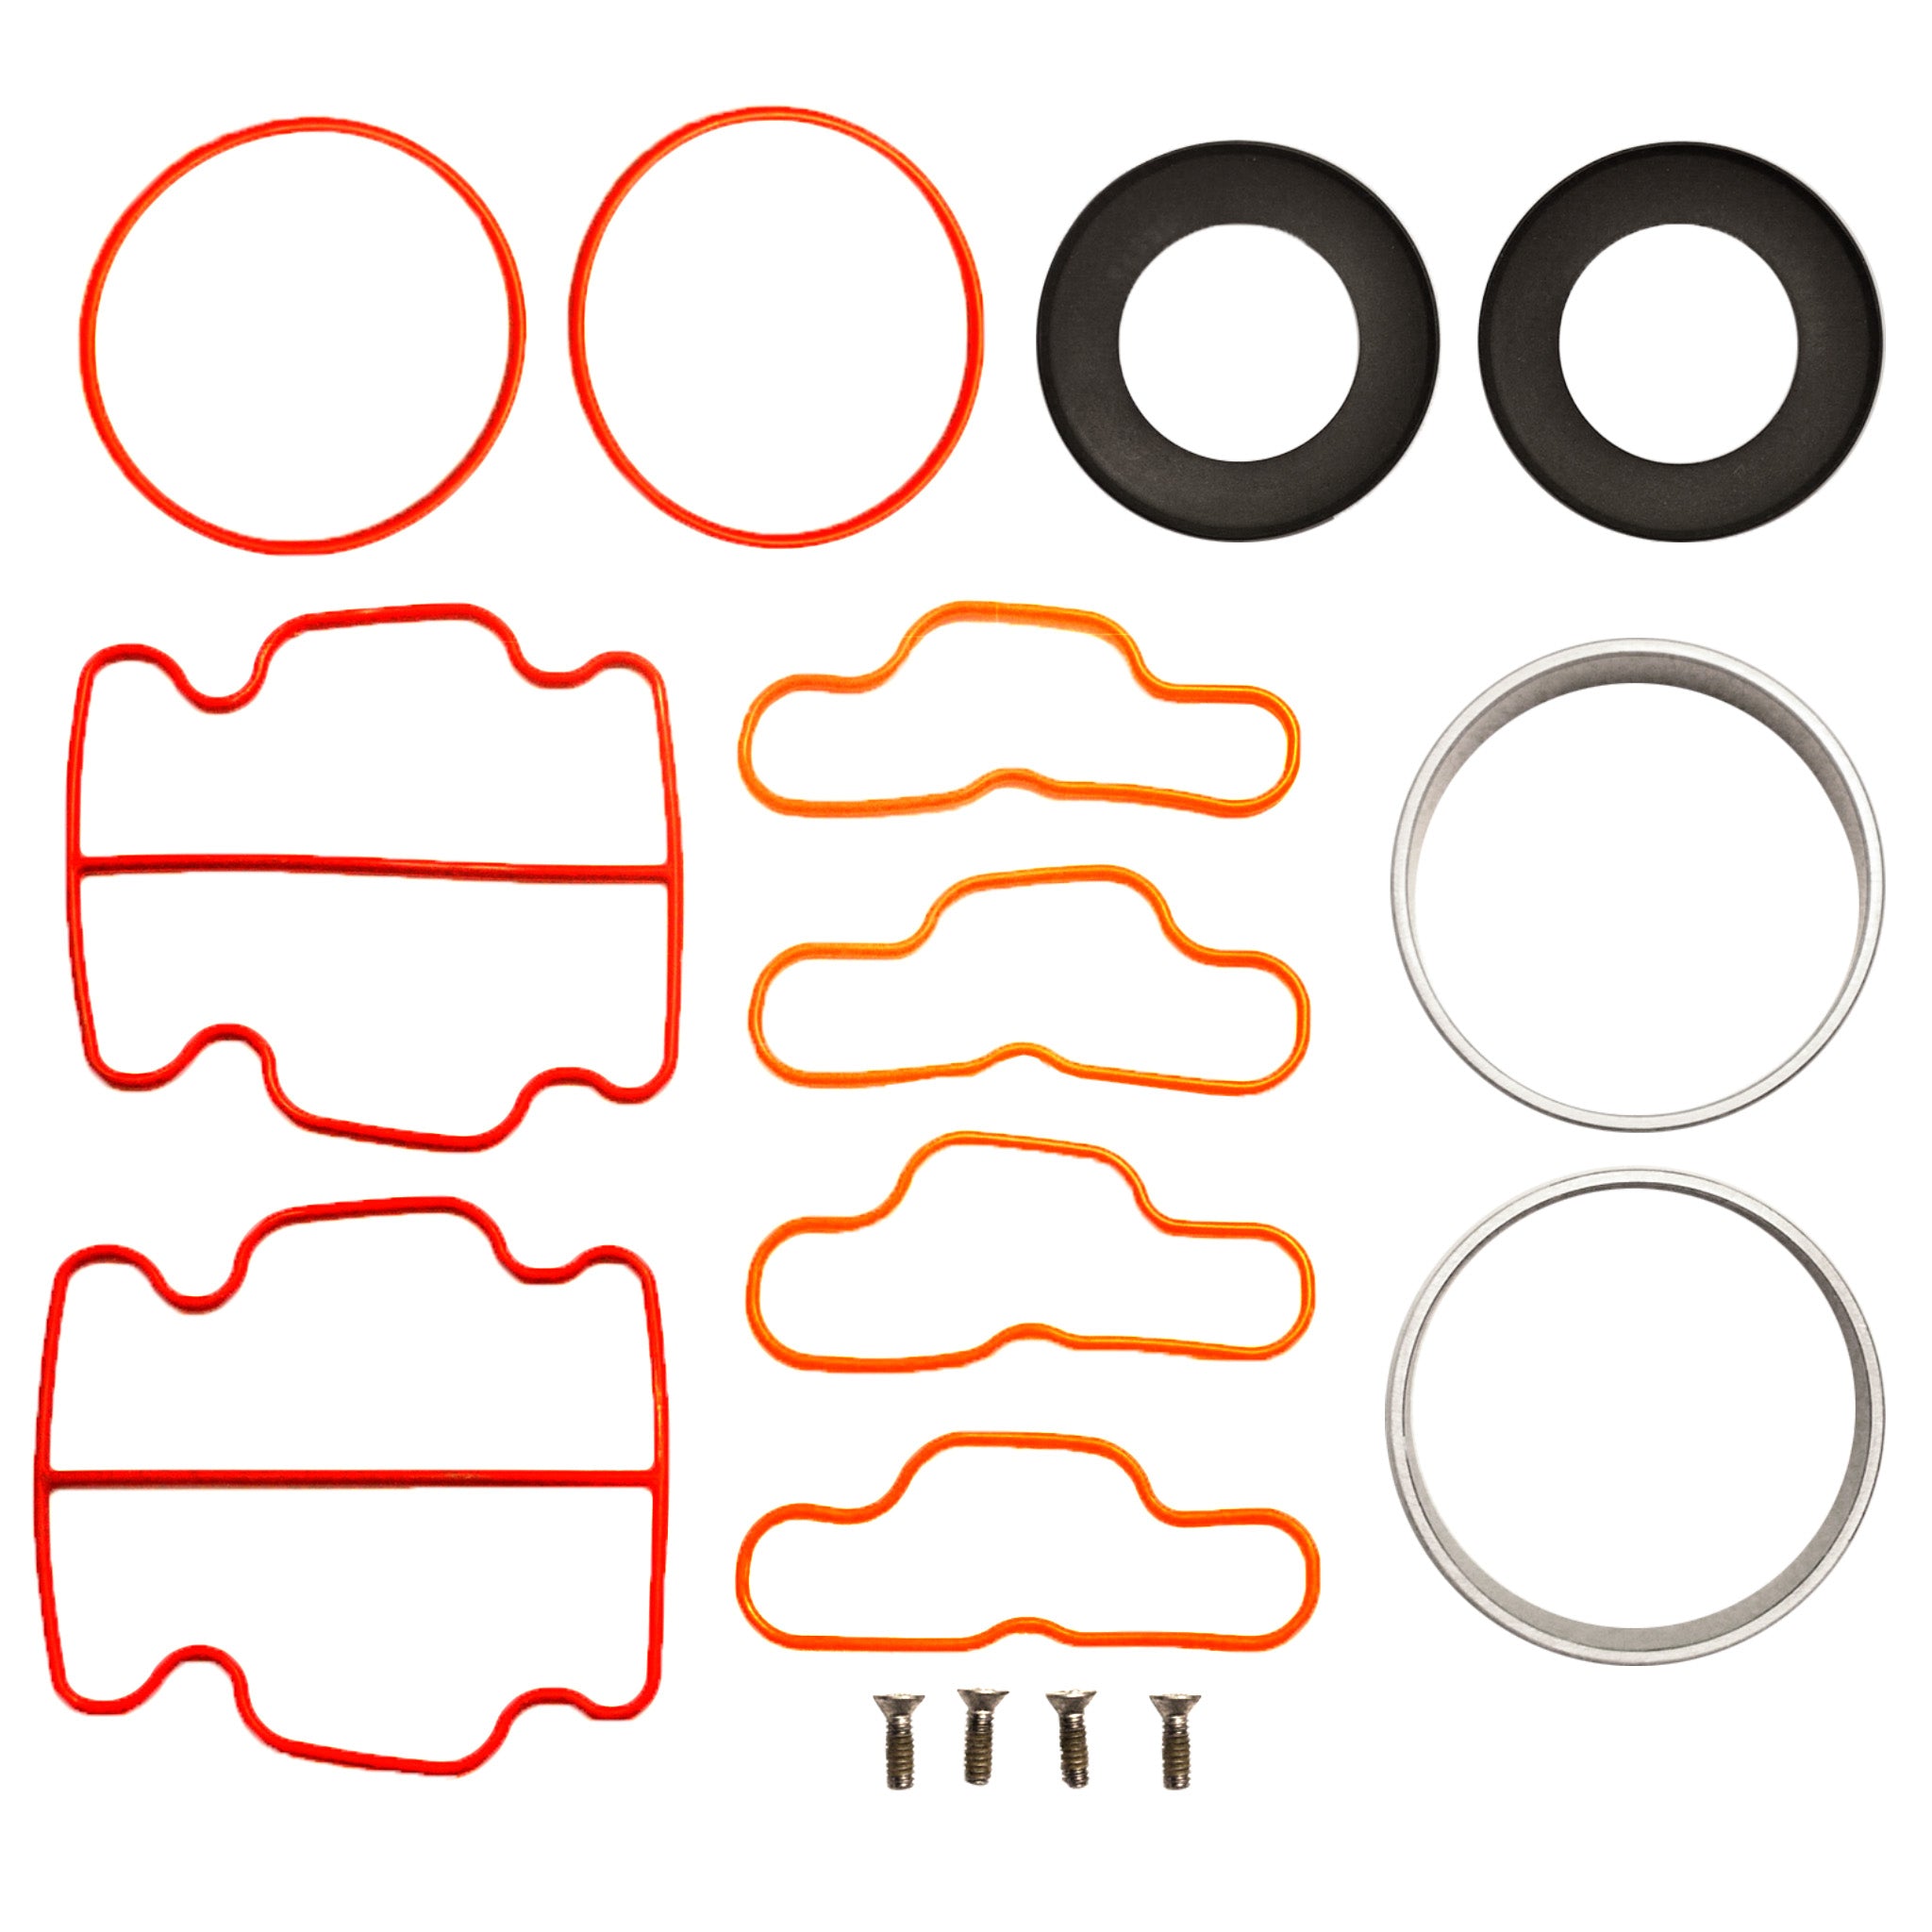 EasyPro SRC50K Repair Kit with piston cups, cylinders, cylinder o-rings, head o-rings, cup retainer screws.